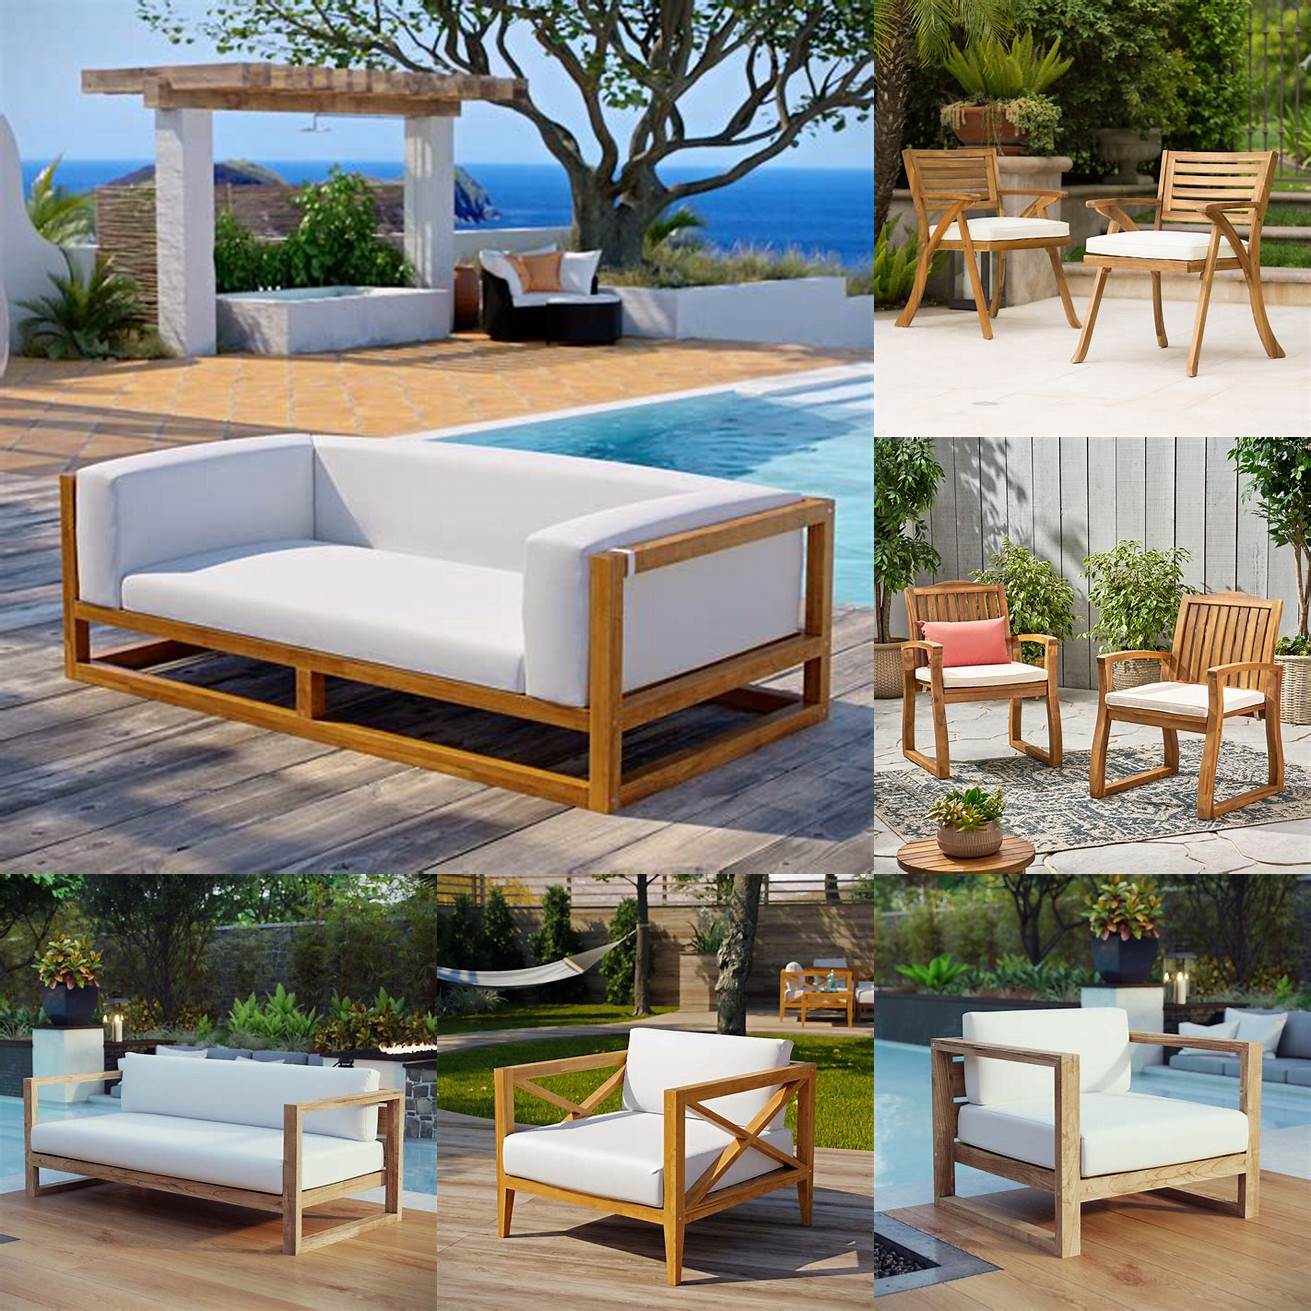 Teak and White Outdoor Furniture